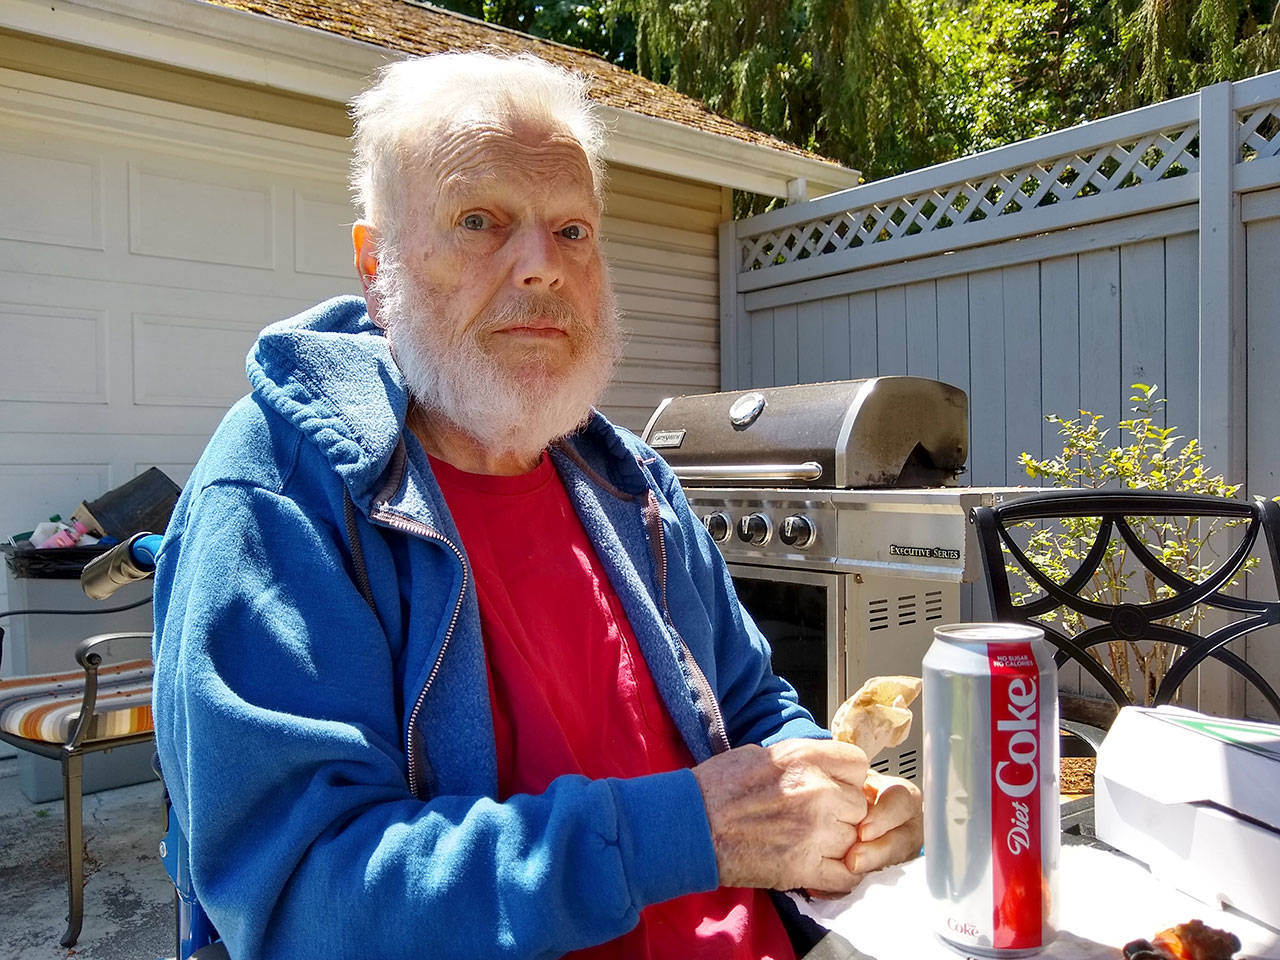 My dad, Eckart Sellinger, enjoying a pizza and soda in the backyard of his home in Port Angeles. (Zorina Barker/for Peninsula Daily News)